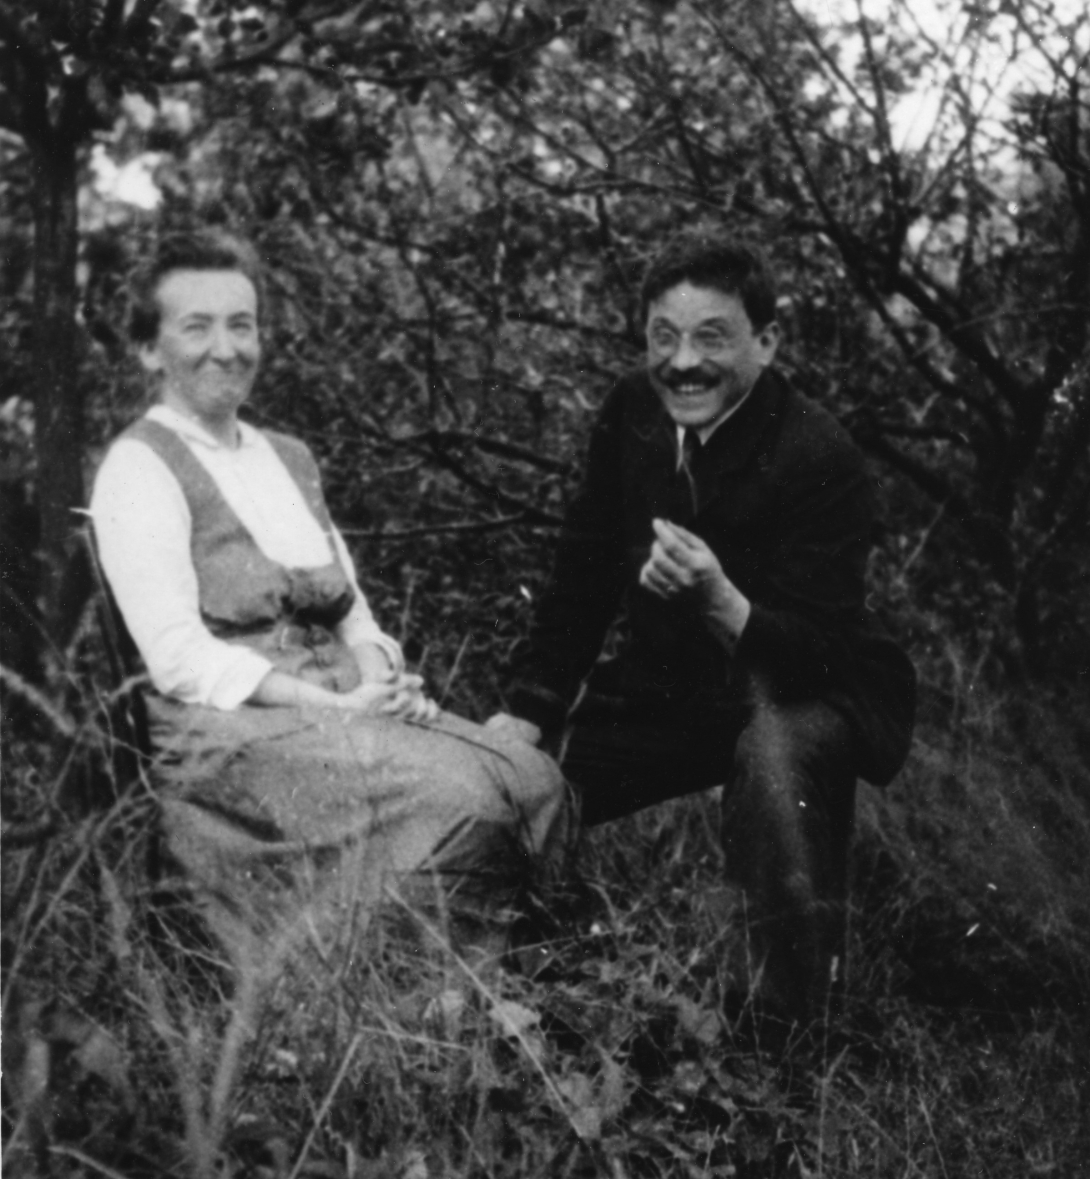 A woman in a dress sits in a garden. She looks mildly amused or trying not to laugh, while next to her kneels a man in a suit with a big bushy mustache laughs openly.